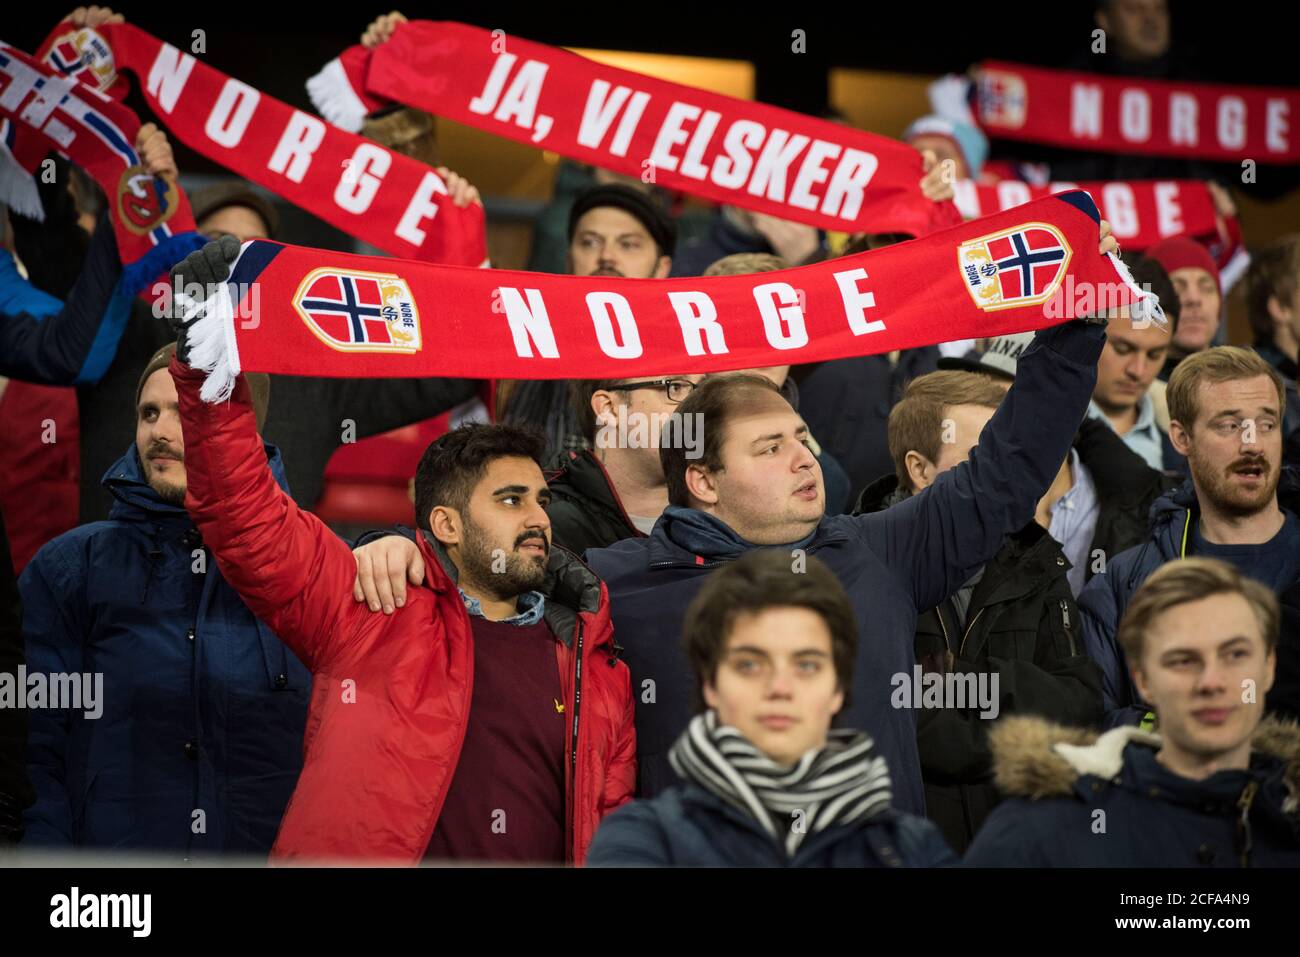 Norwegian football fans stand side-by-side during the national anthem  before the play-off match against Hungary at Ullevaal stadium in Oslo  (Gonzales Photo/Jan-Erik Eriksen Stock Photo - Alamy